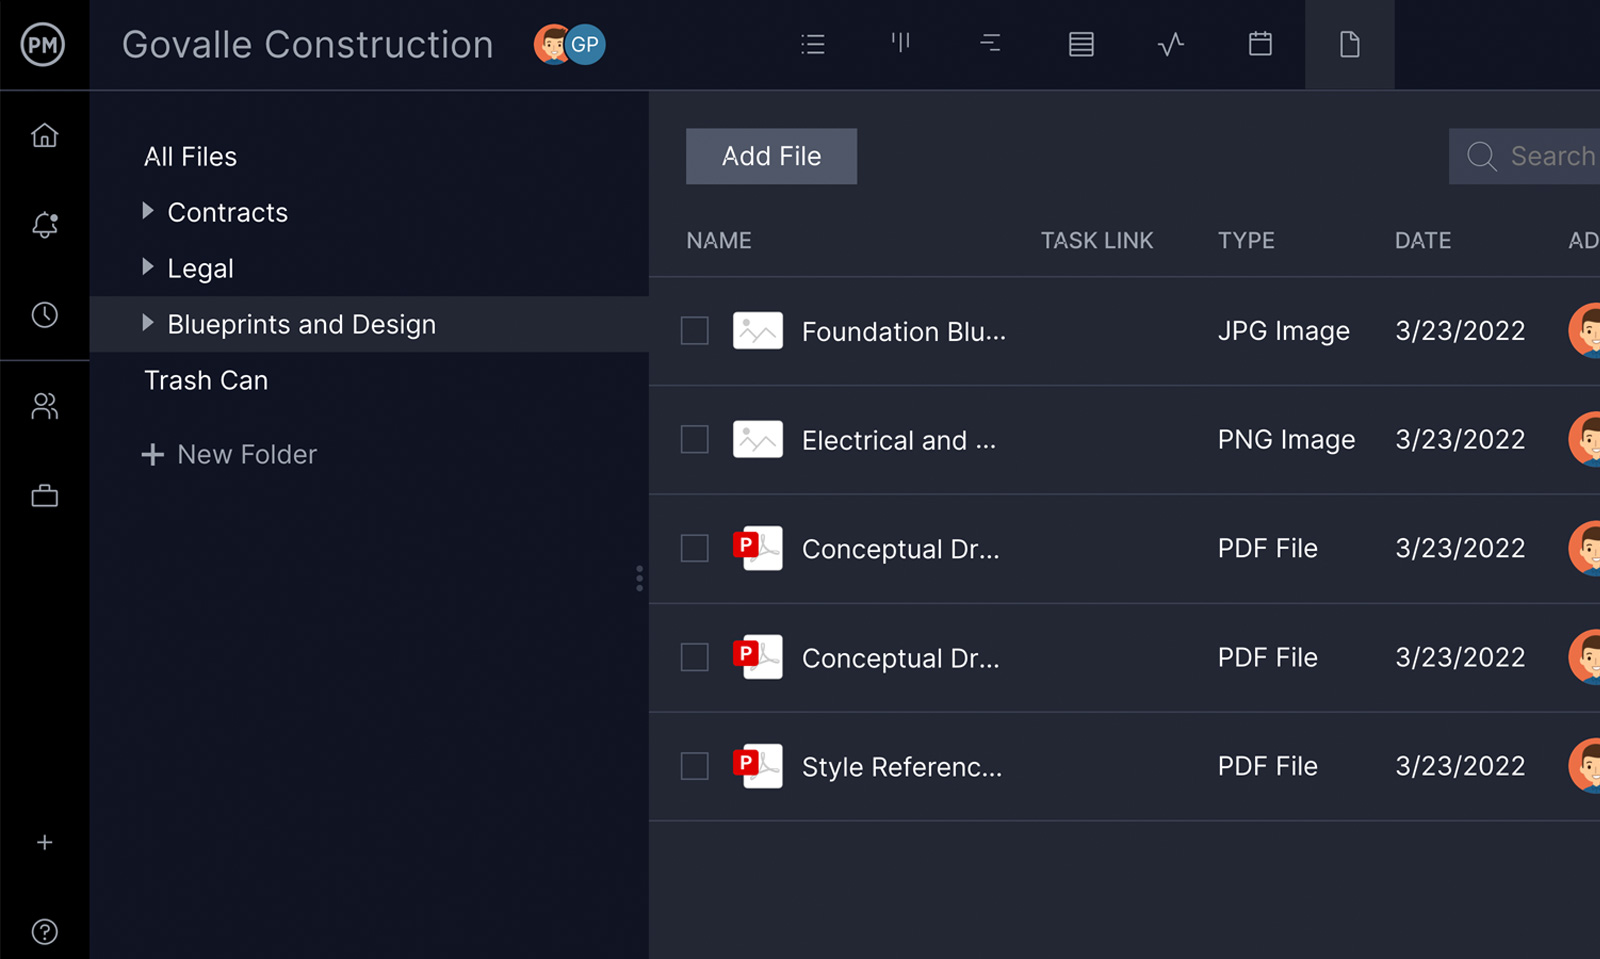 ProjectManager's file manager a critical part of this construction project management software